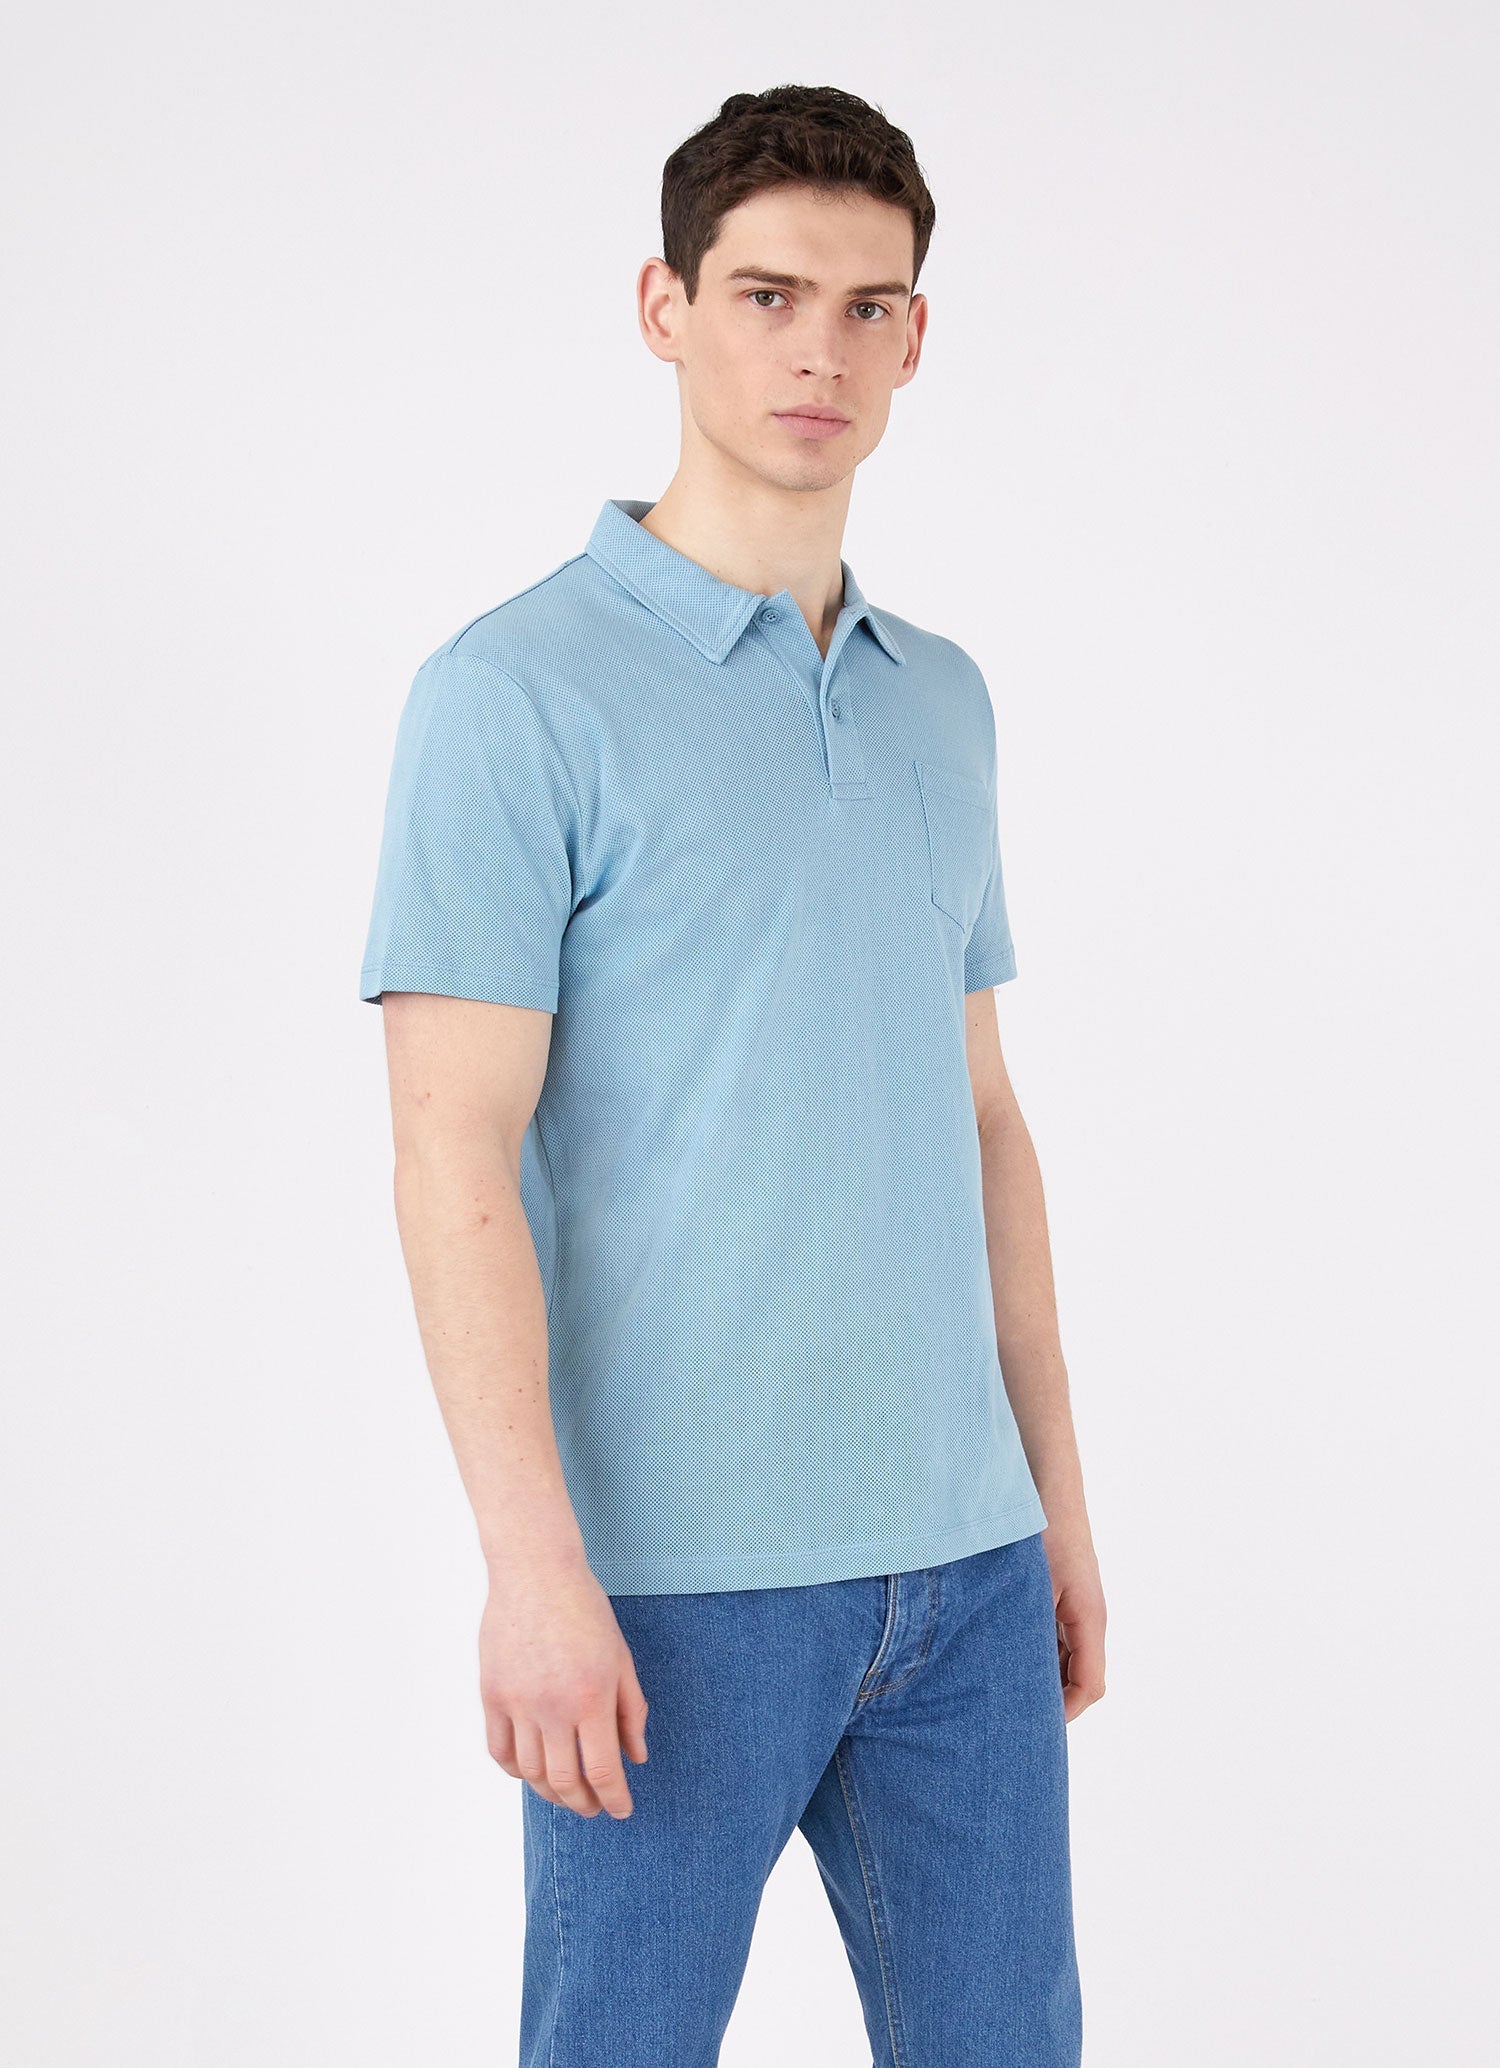 Men's Riviera Polo Shirt in Storm Blue